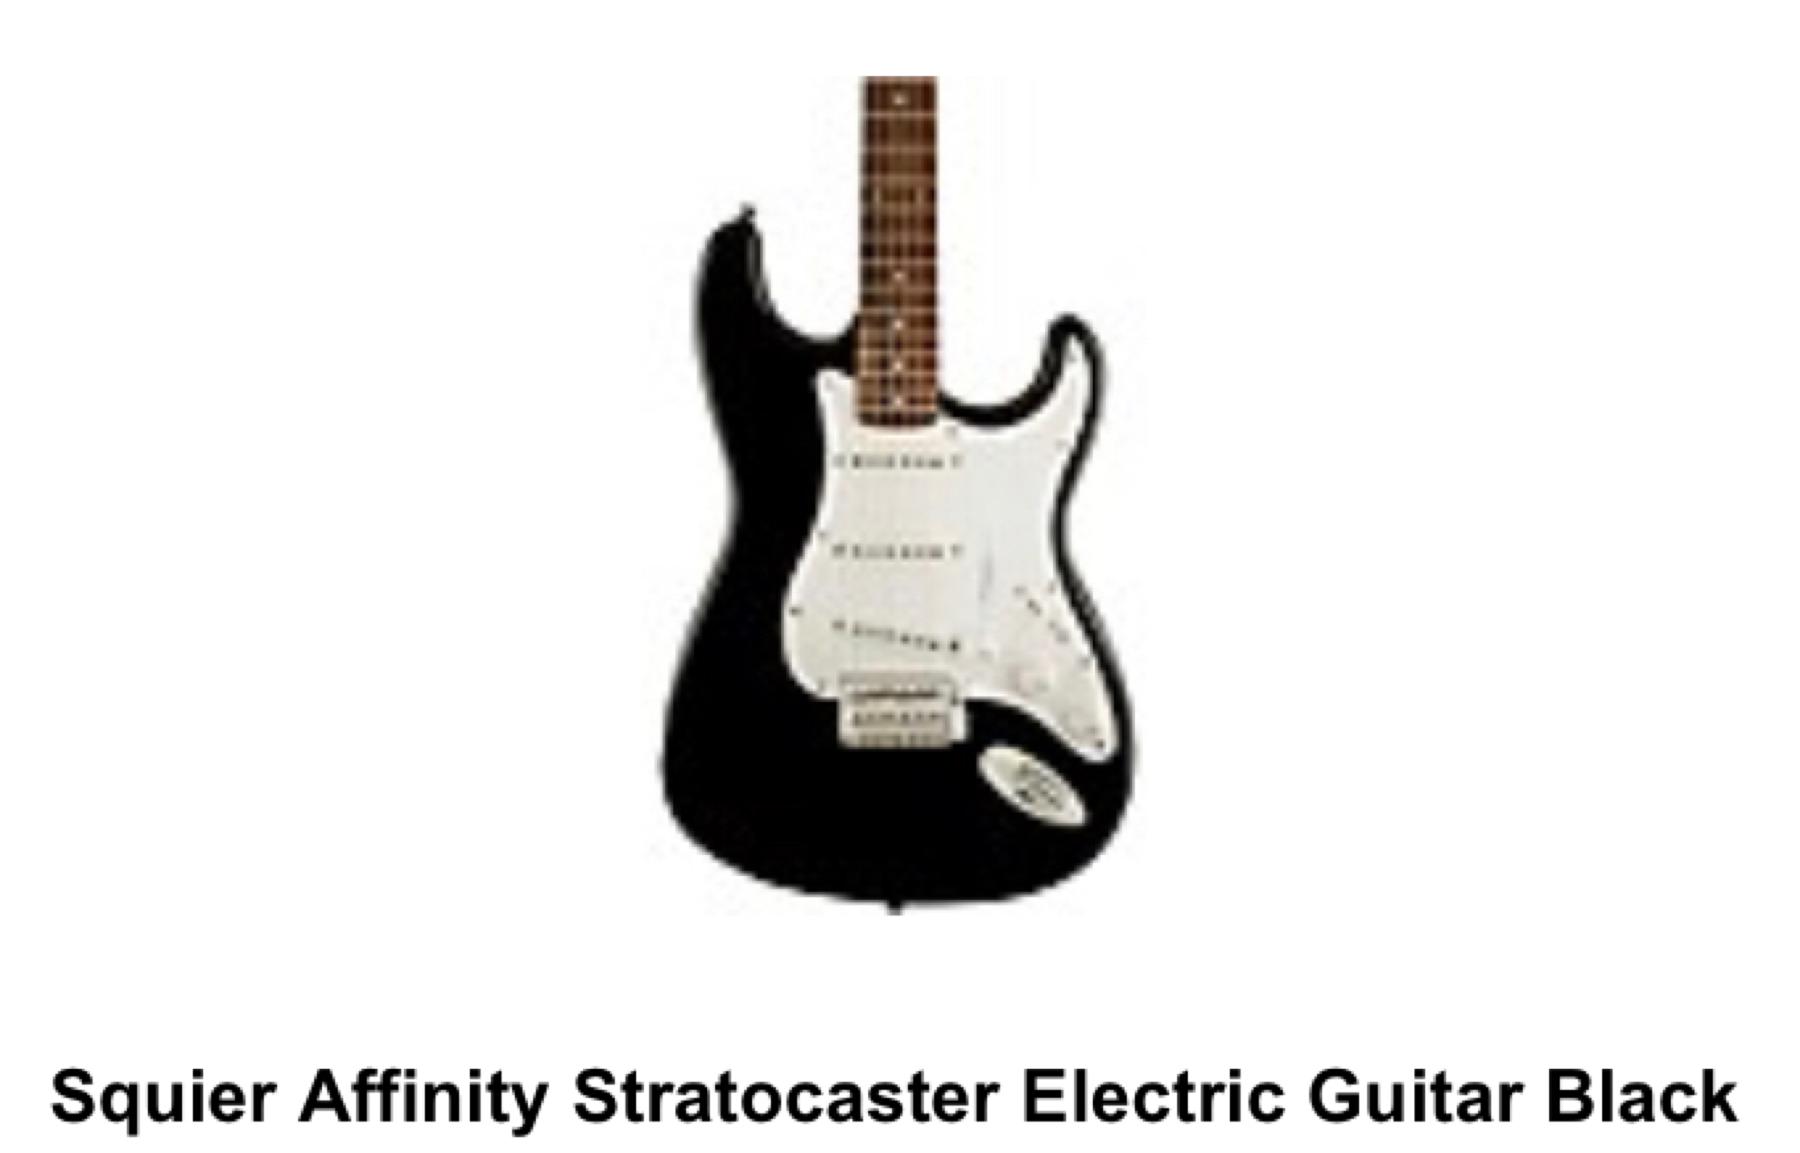 Agshsjsj I’m so excited I’m getting an electric guitar bc I decided to spend some birthday money that I’ve been saving up for a while—even though I said I wouldn’t spend it for a while, I think this is a good investment :) 